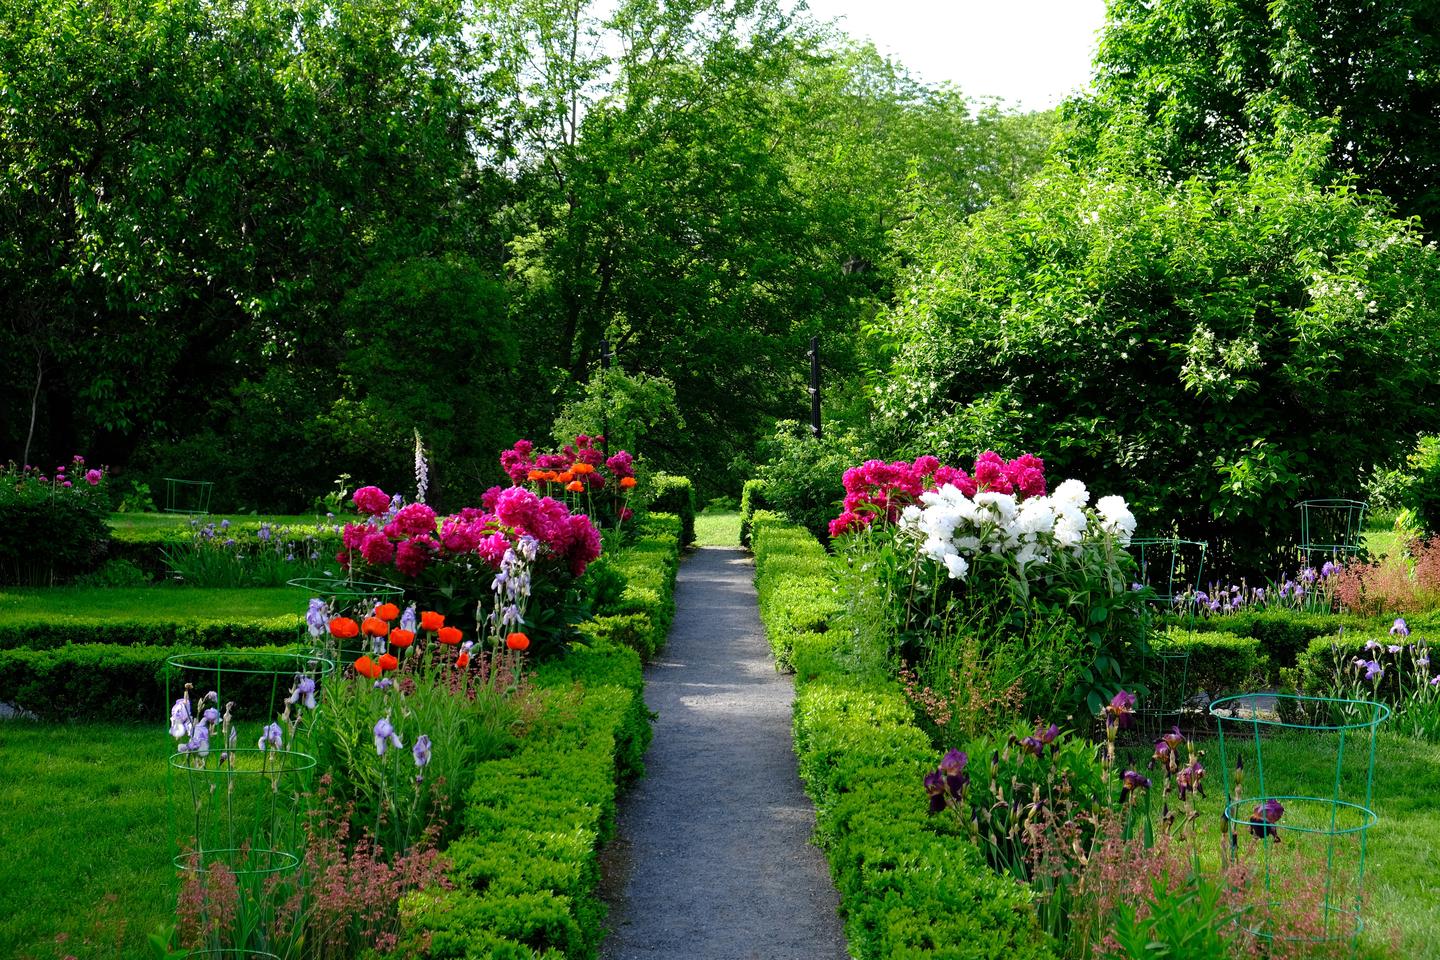 A gravel path lined by small green leafy boxwood hedges, with blooming flowers to the sides of the path.The gardens at Peace field are constantly changing and always have something new to see. 